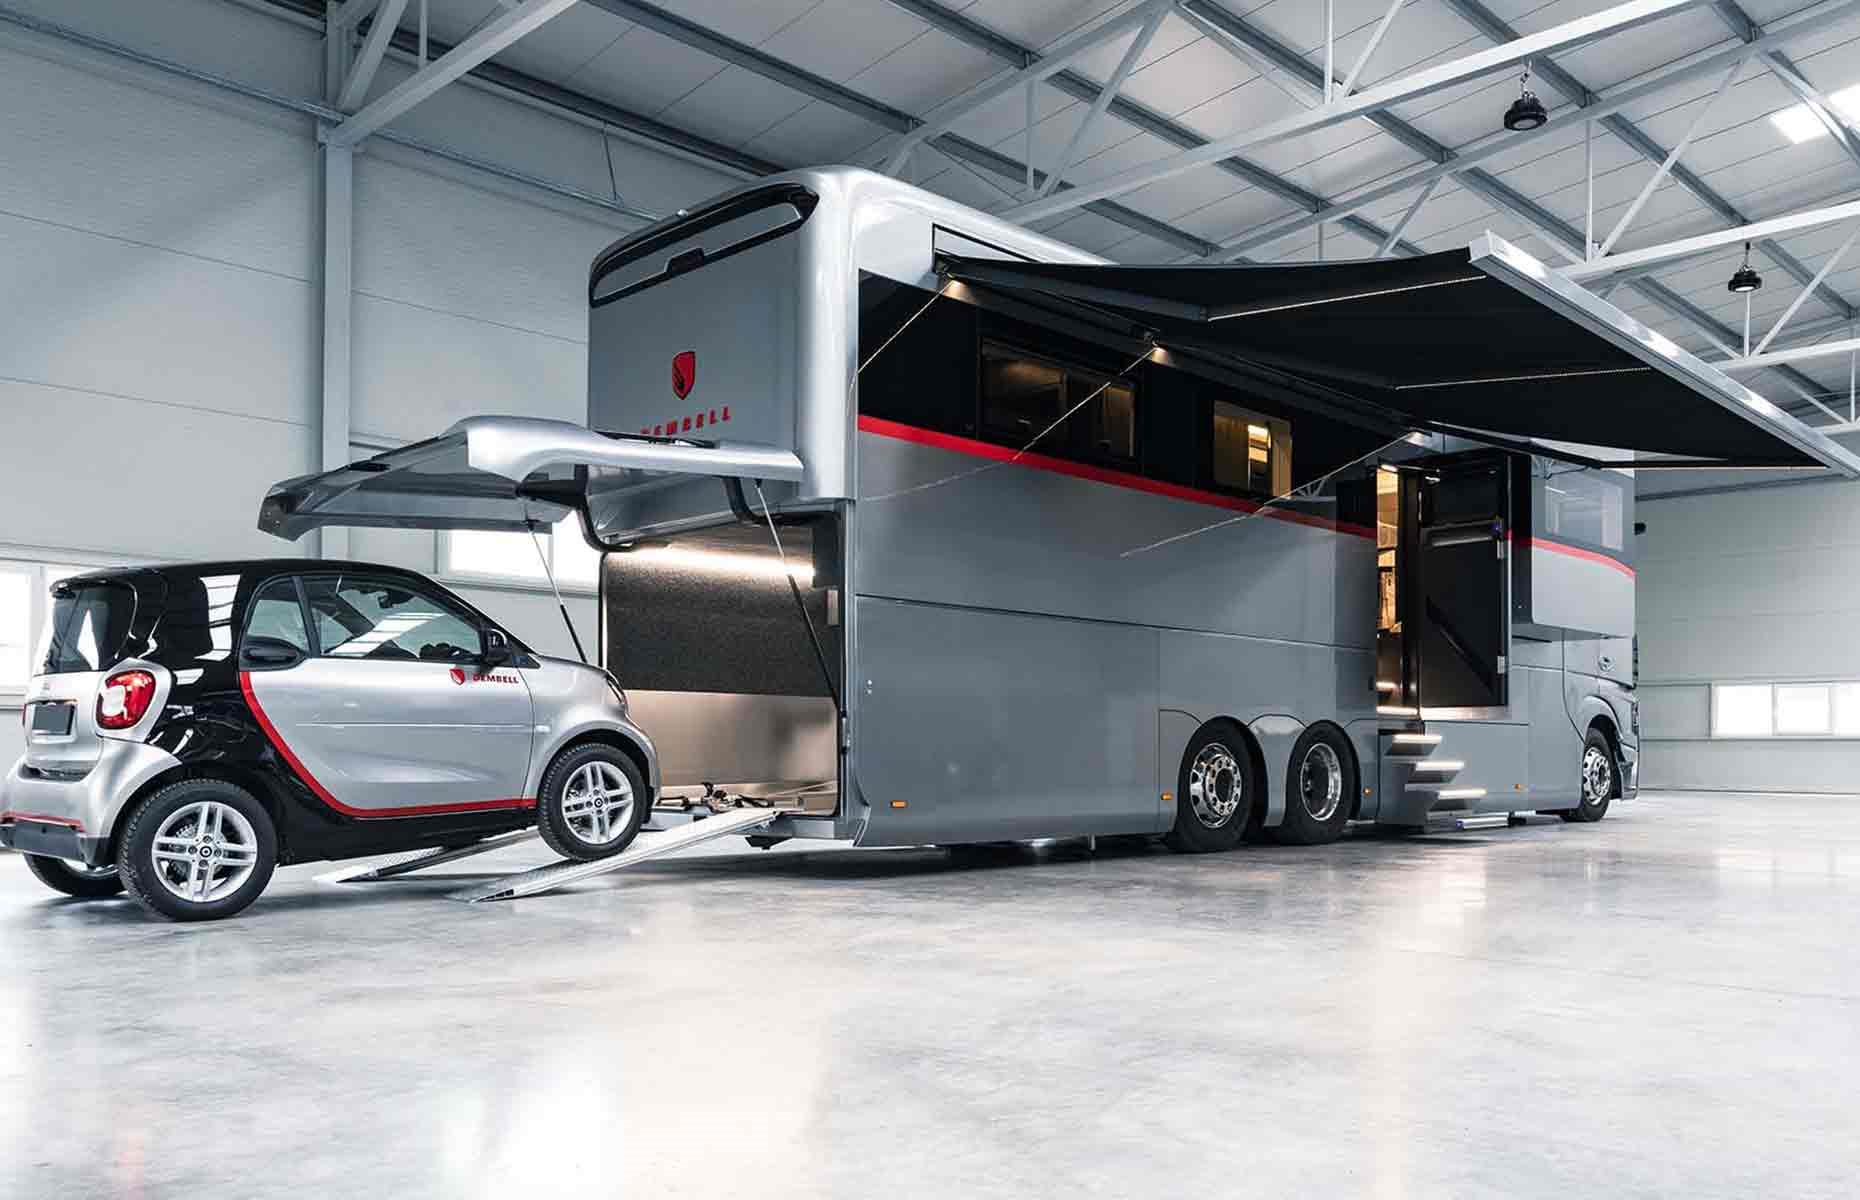 Millionaire motorhomes – the world's most expensive RVs